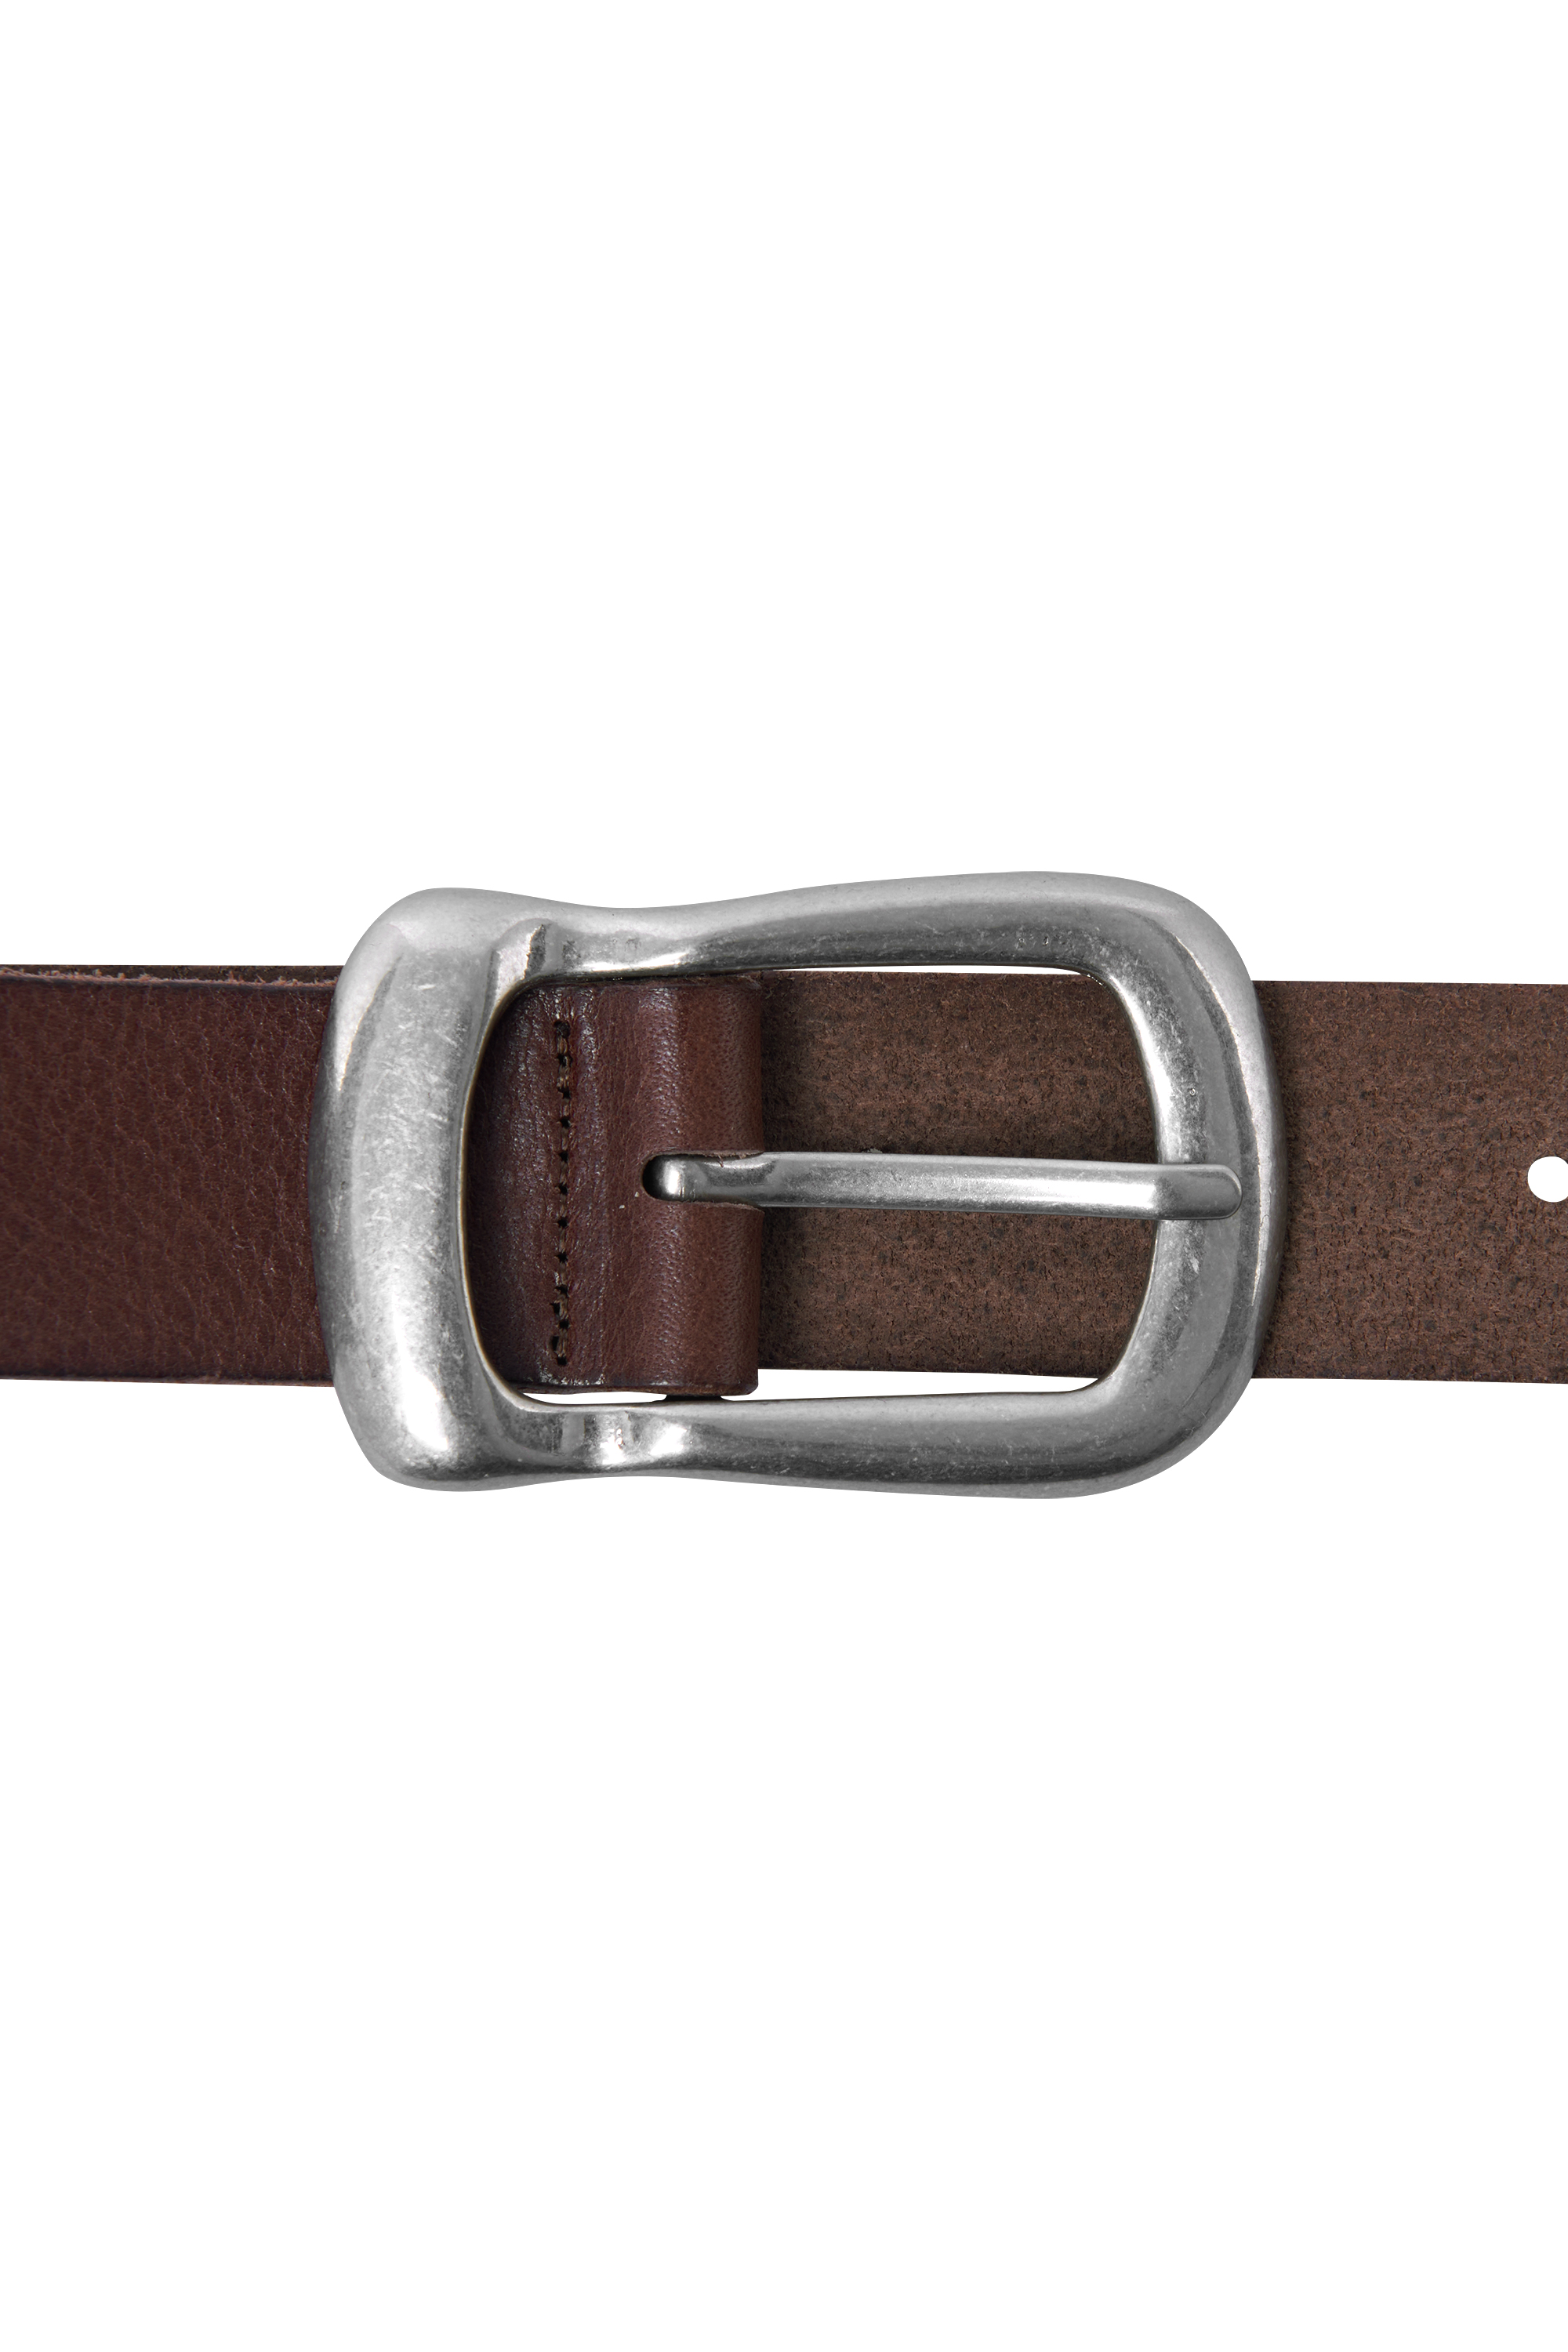 MOSS LEATHER BELT BROWN